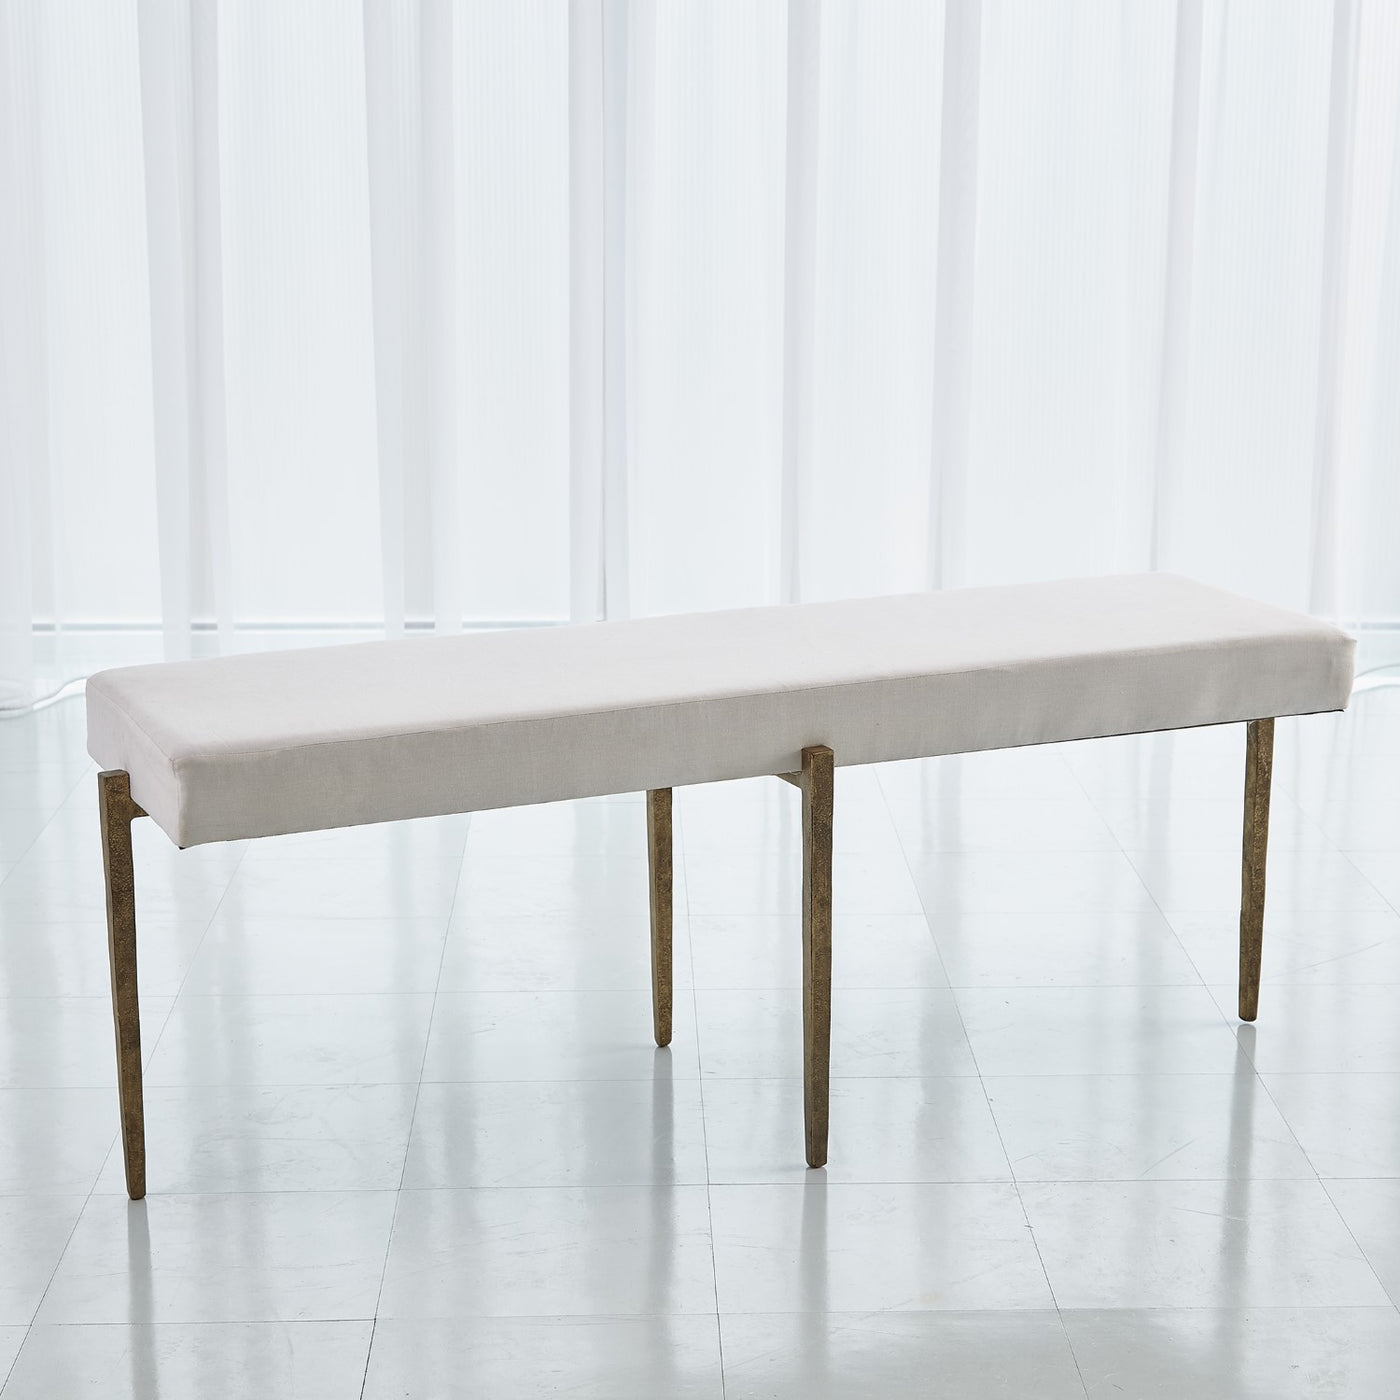 BENCH ANTIQUE GOLD WITH MUSLIN CUSHION LARGE